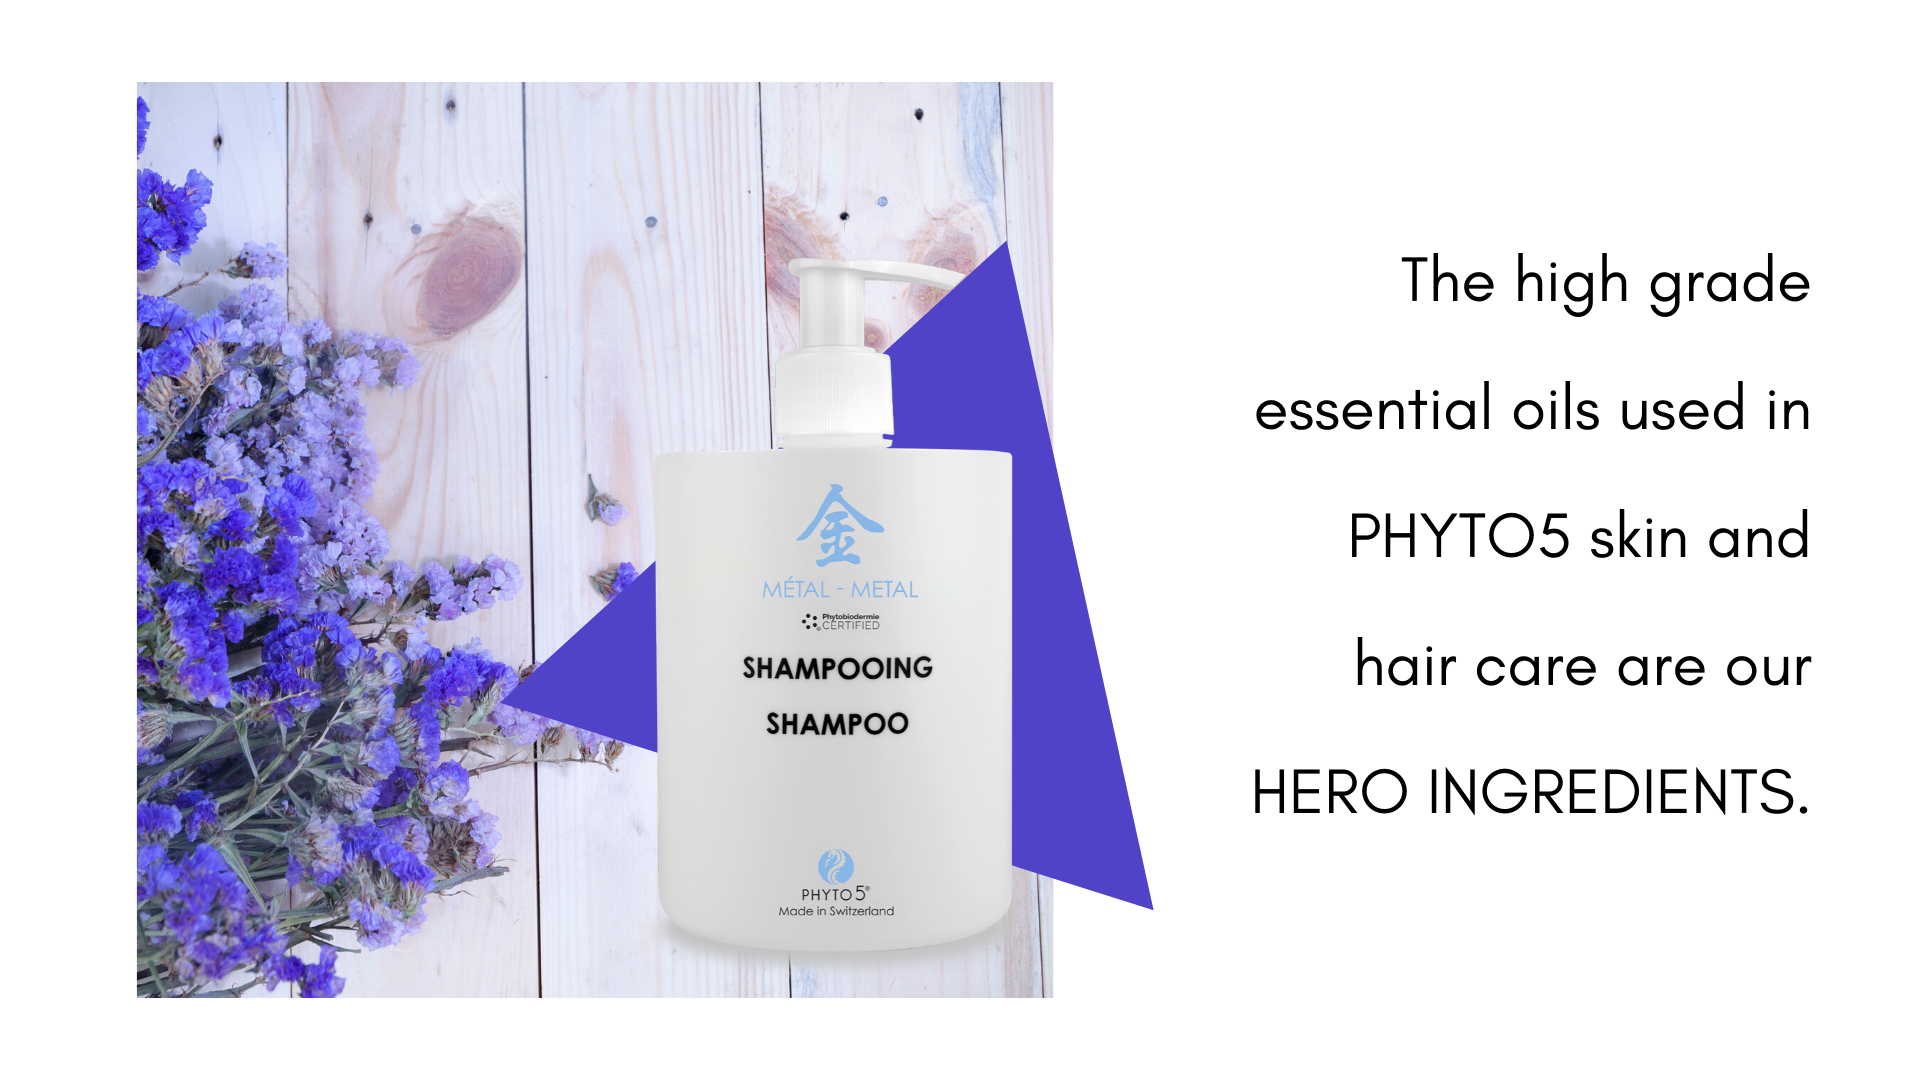 hero-ingredients-phyto5-skincare-essential-poils.png